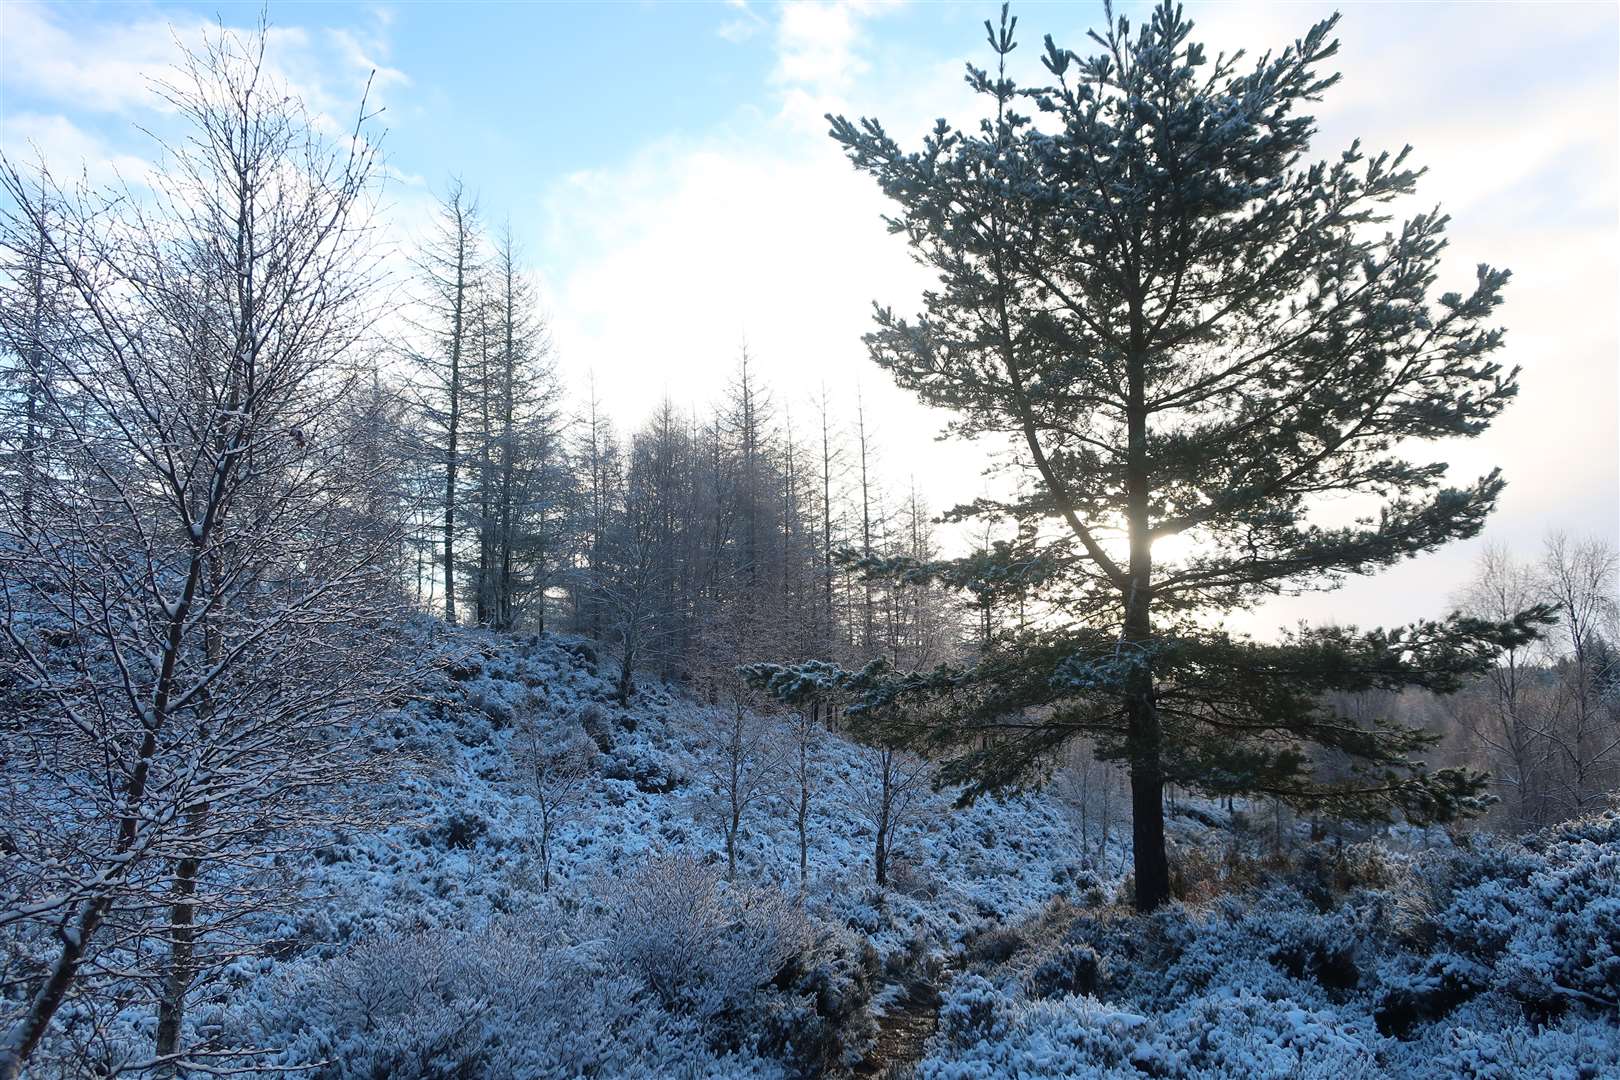 A winter wonderland high above the shores of Loch Ness south of Inverfarigaig.